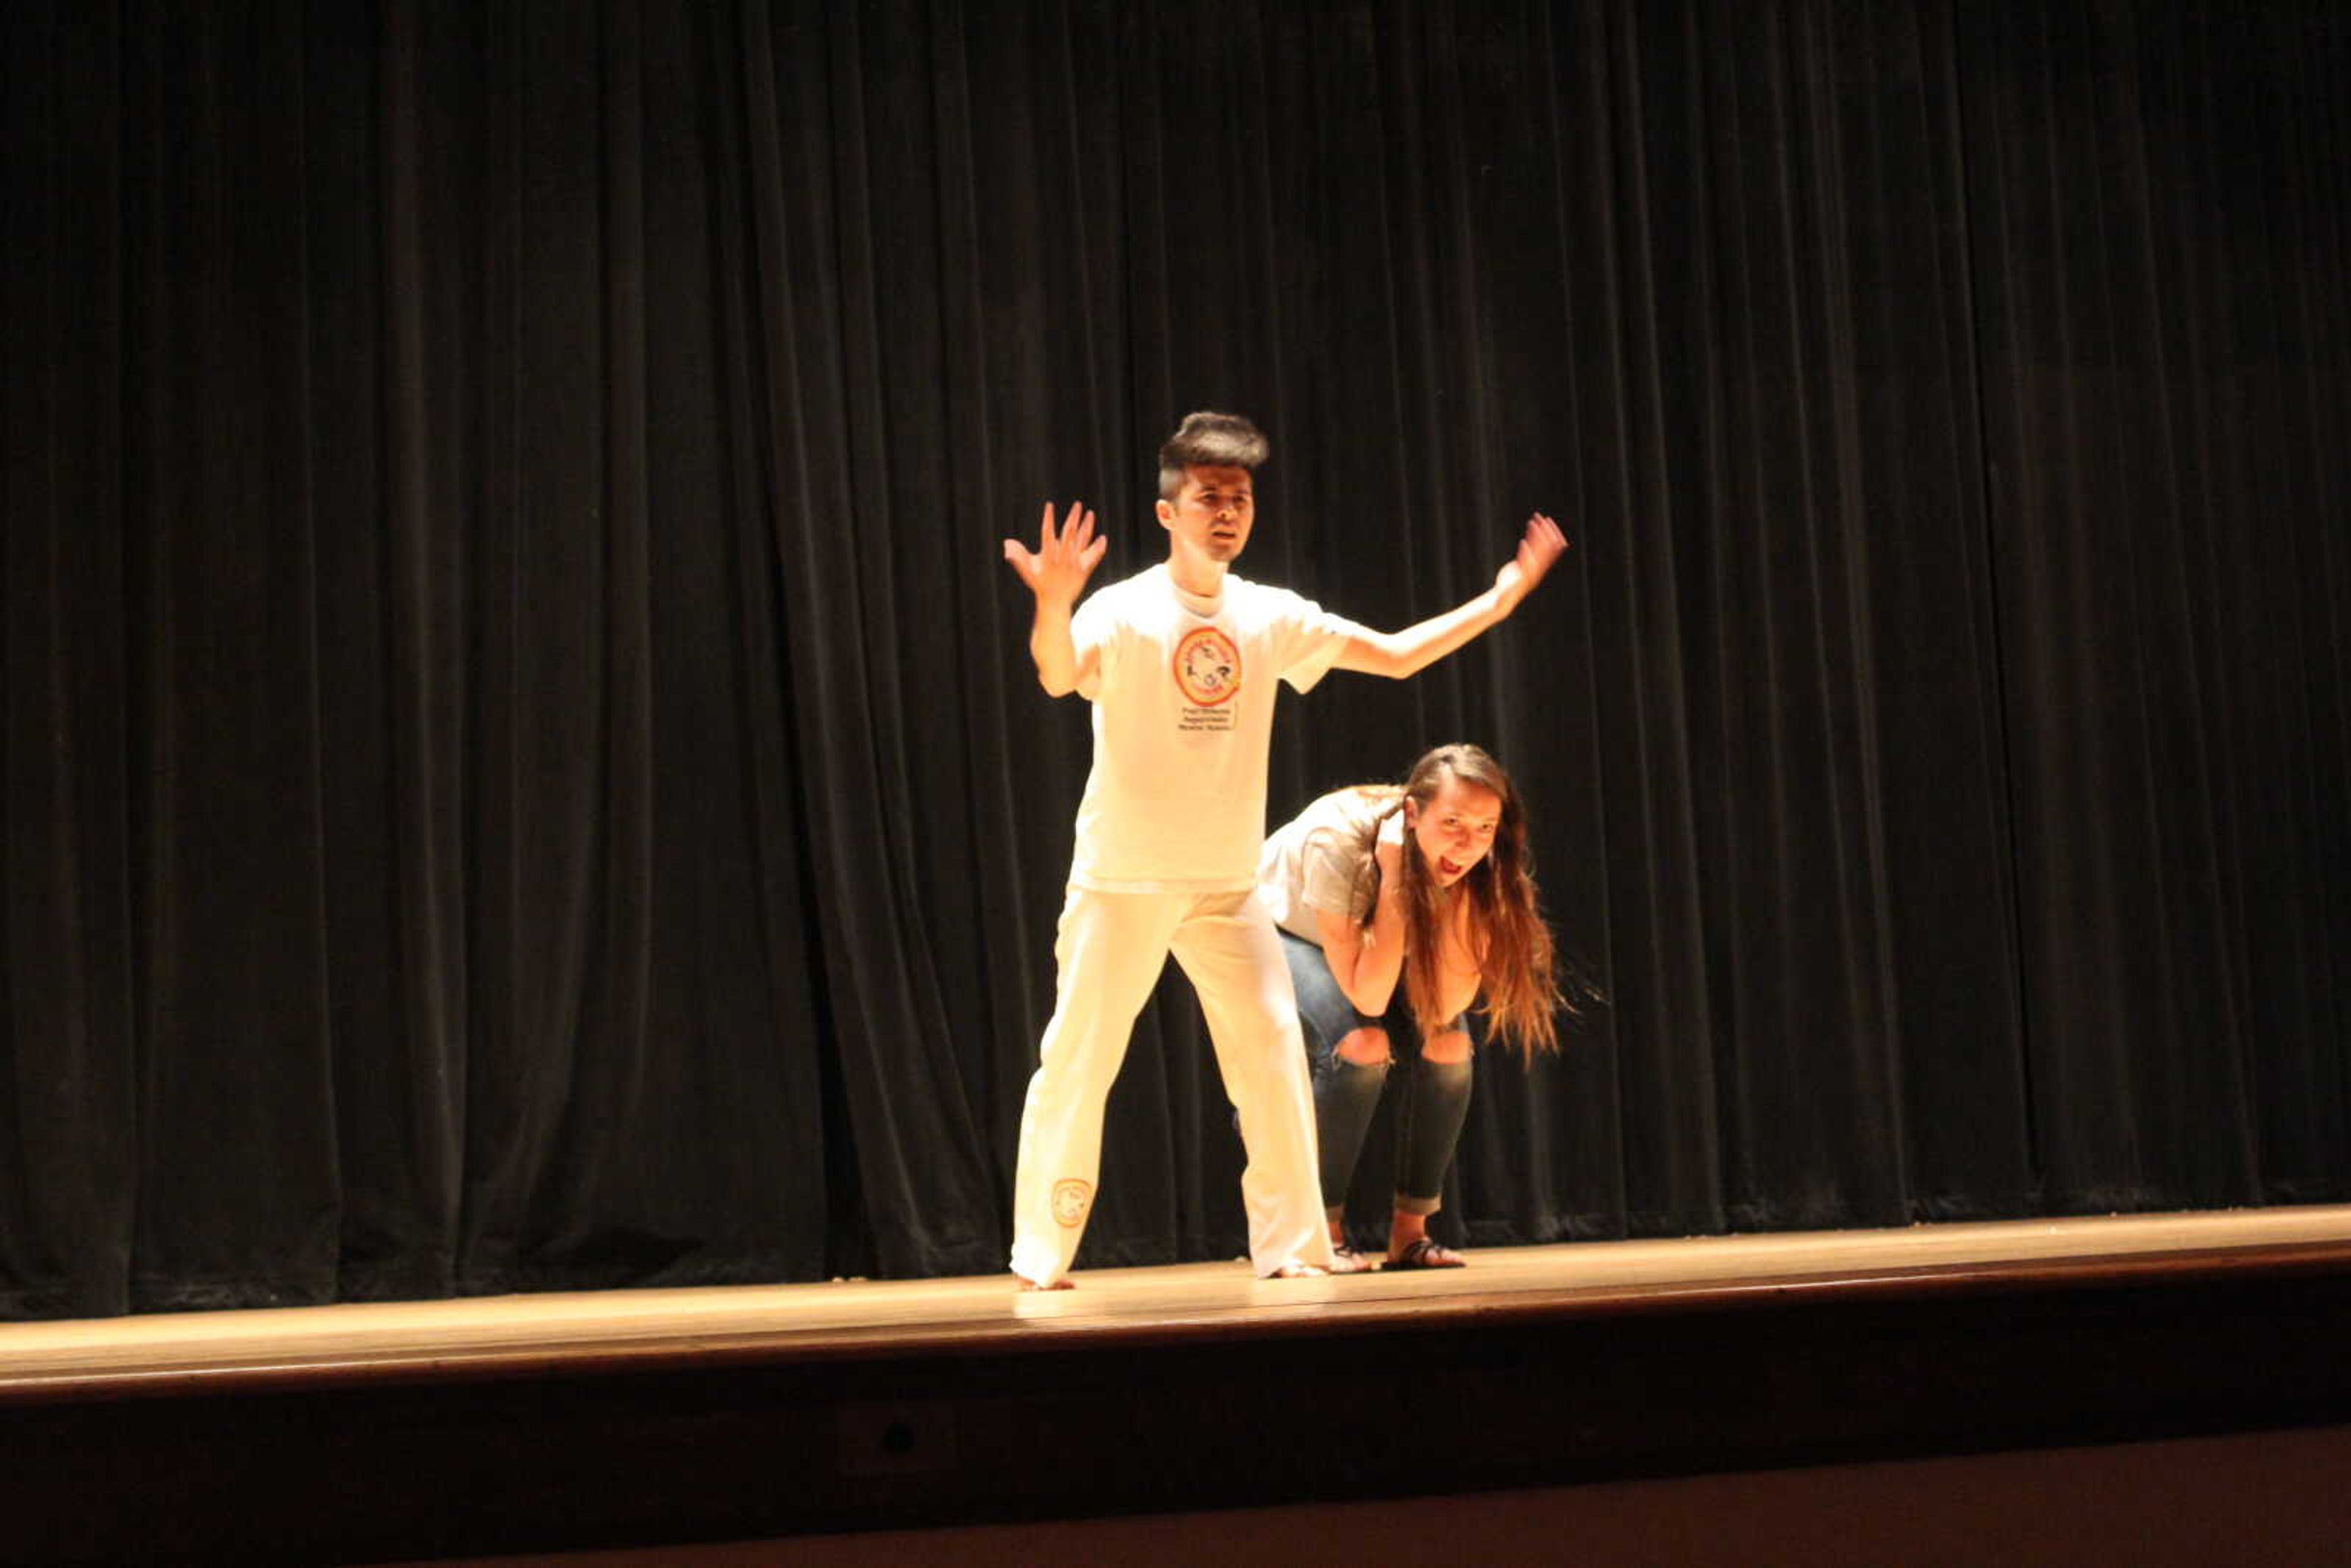 Sophomore Ricardo Ashimi seeks crowd participation as he attempts to jump over Homecoming Planning Committee president Destiny Tulo-Lang's back during his Brazilian martial arts routine at the Homecoming Planning Committe's annual talent show at 7 p.m. on Tuesday, Nov. 2 in the Academic Hall auditorium.